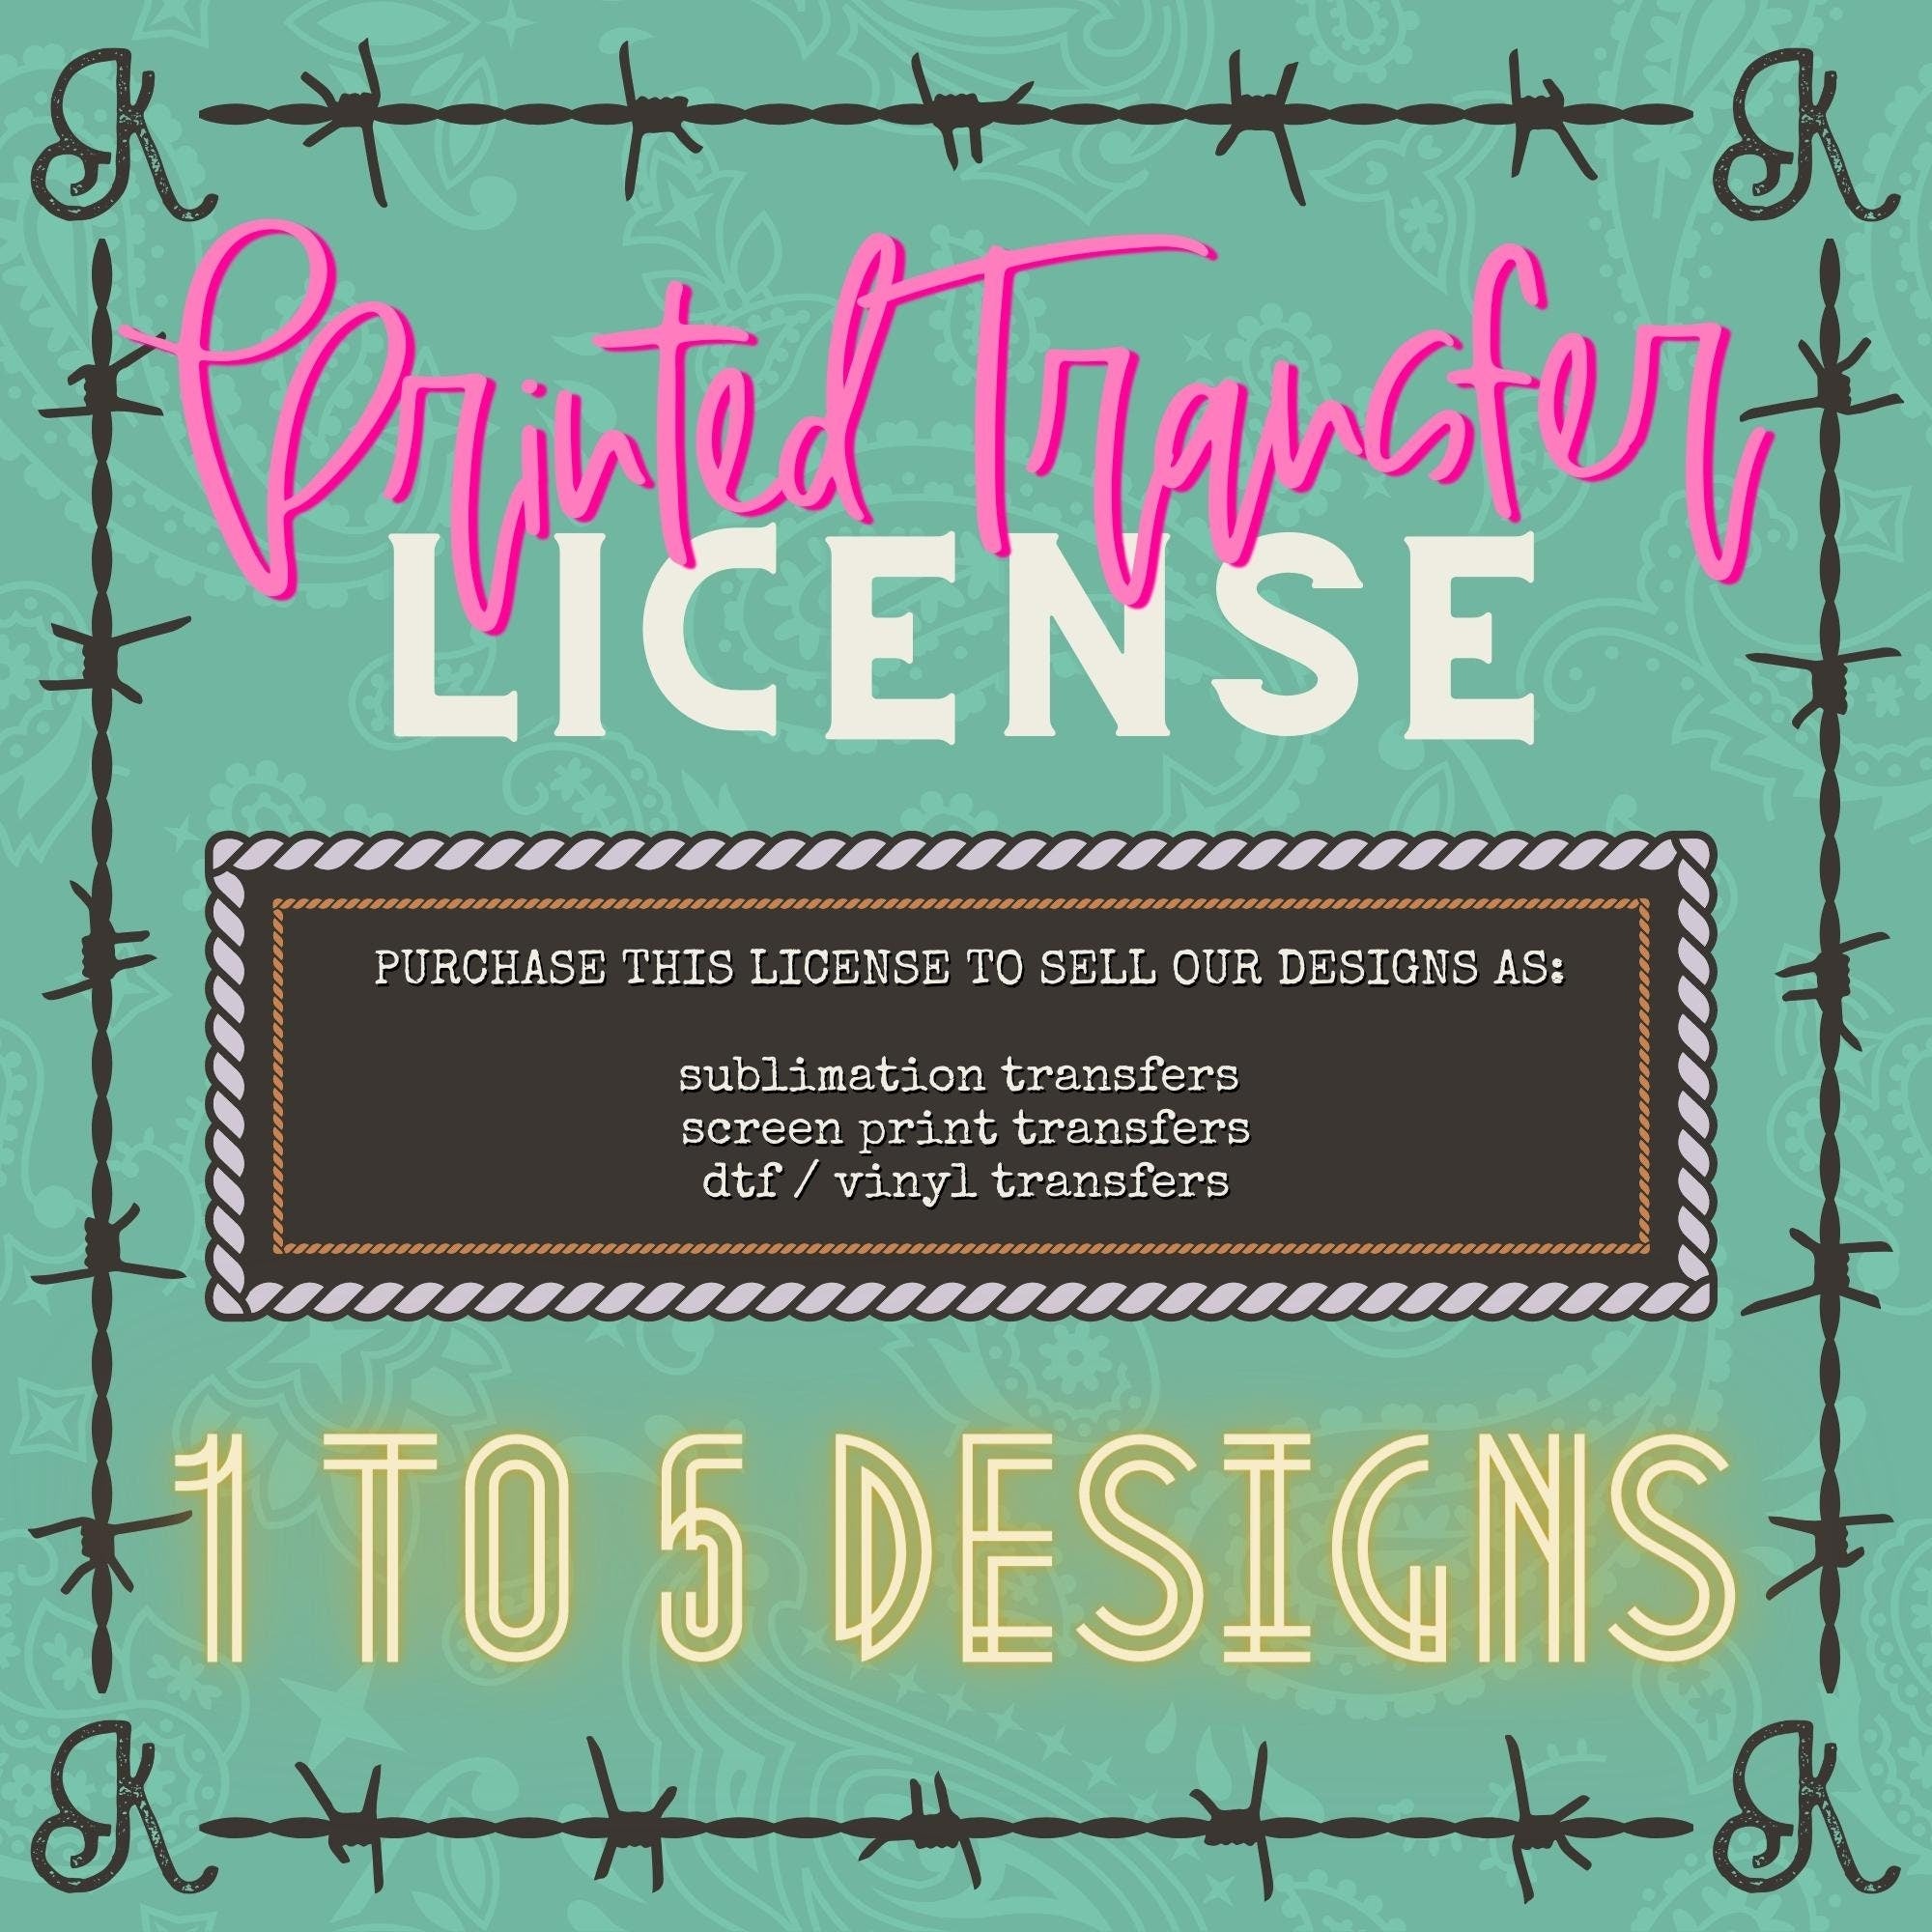 Printed Transfer License 1 to 5 Designs